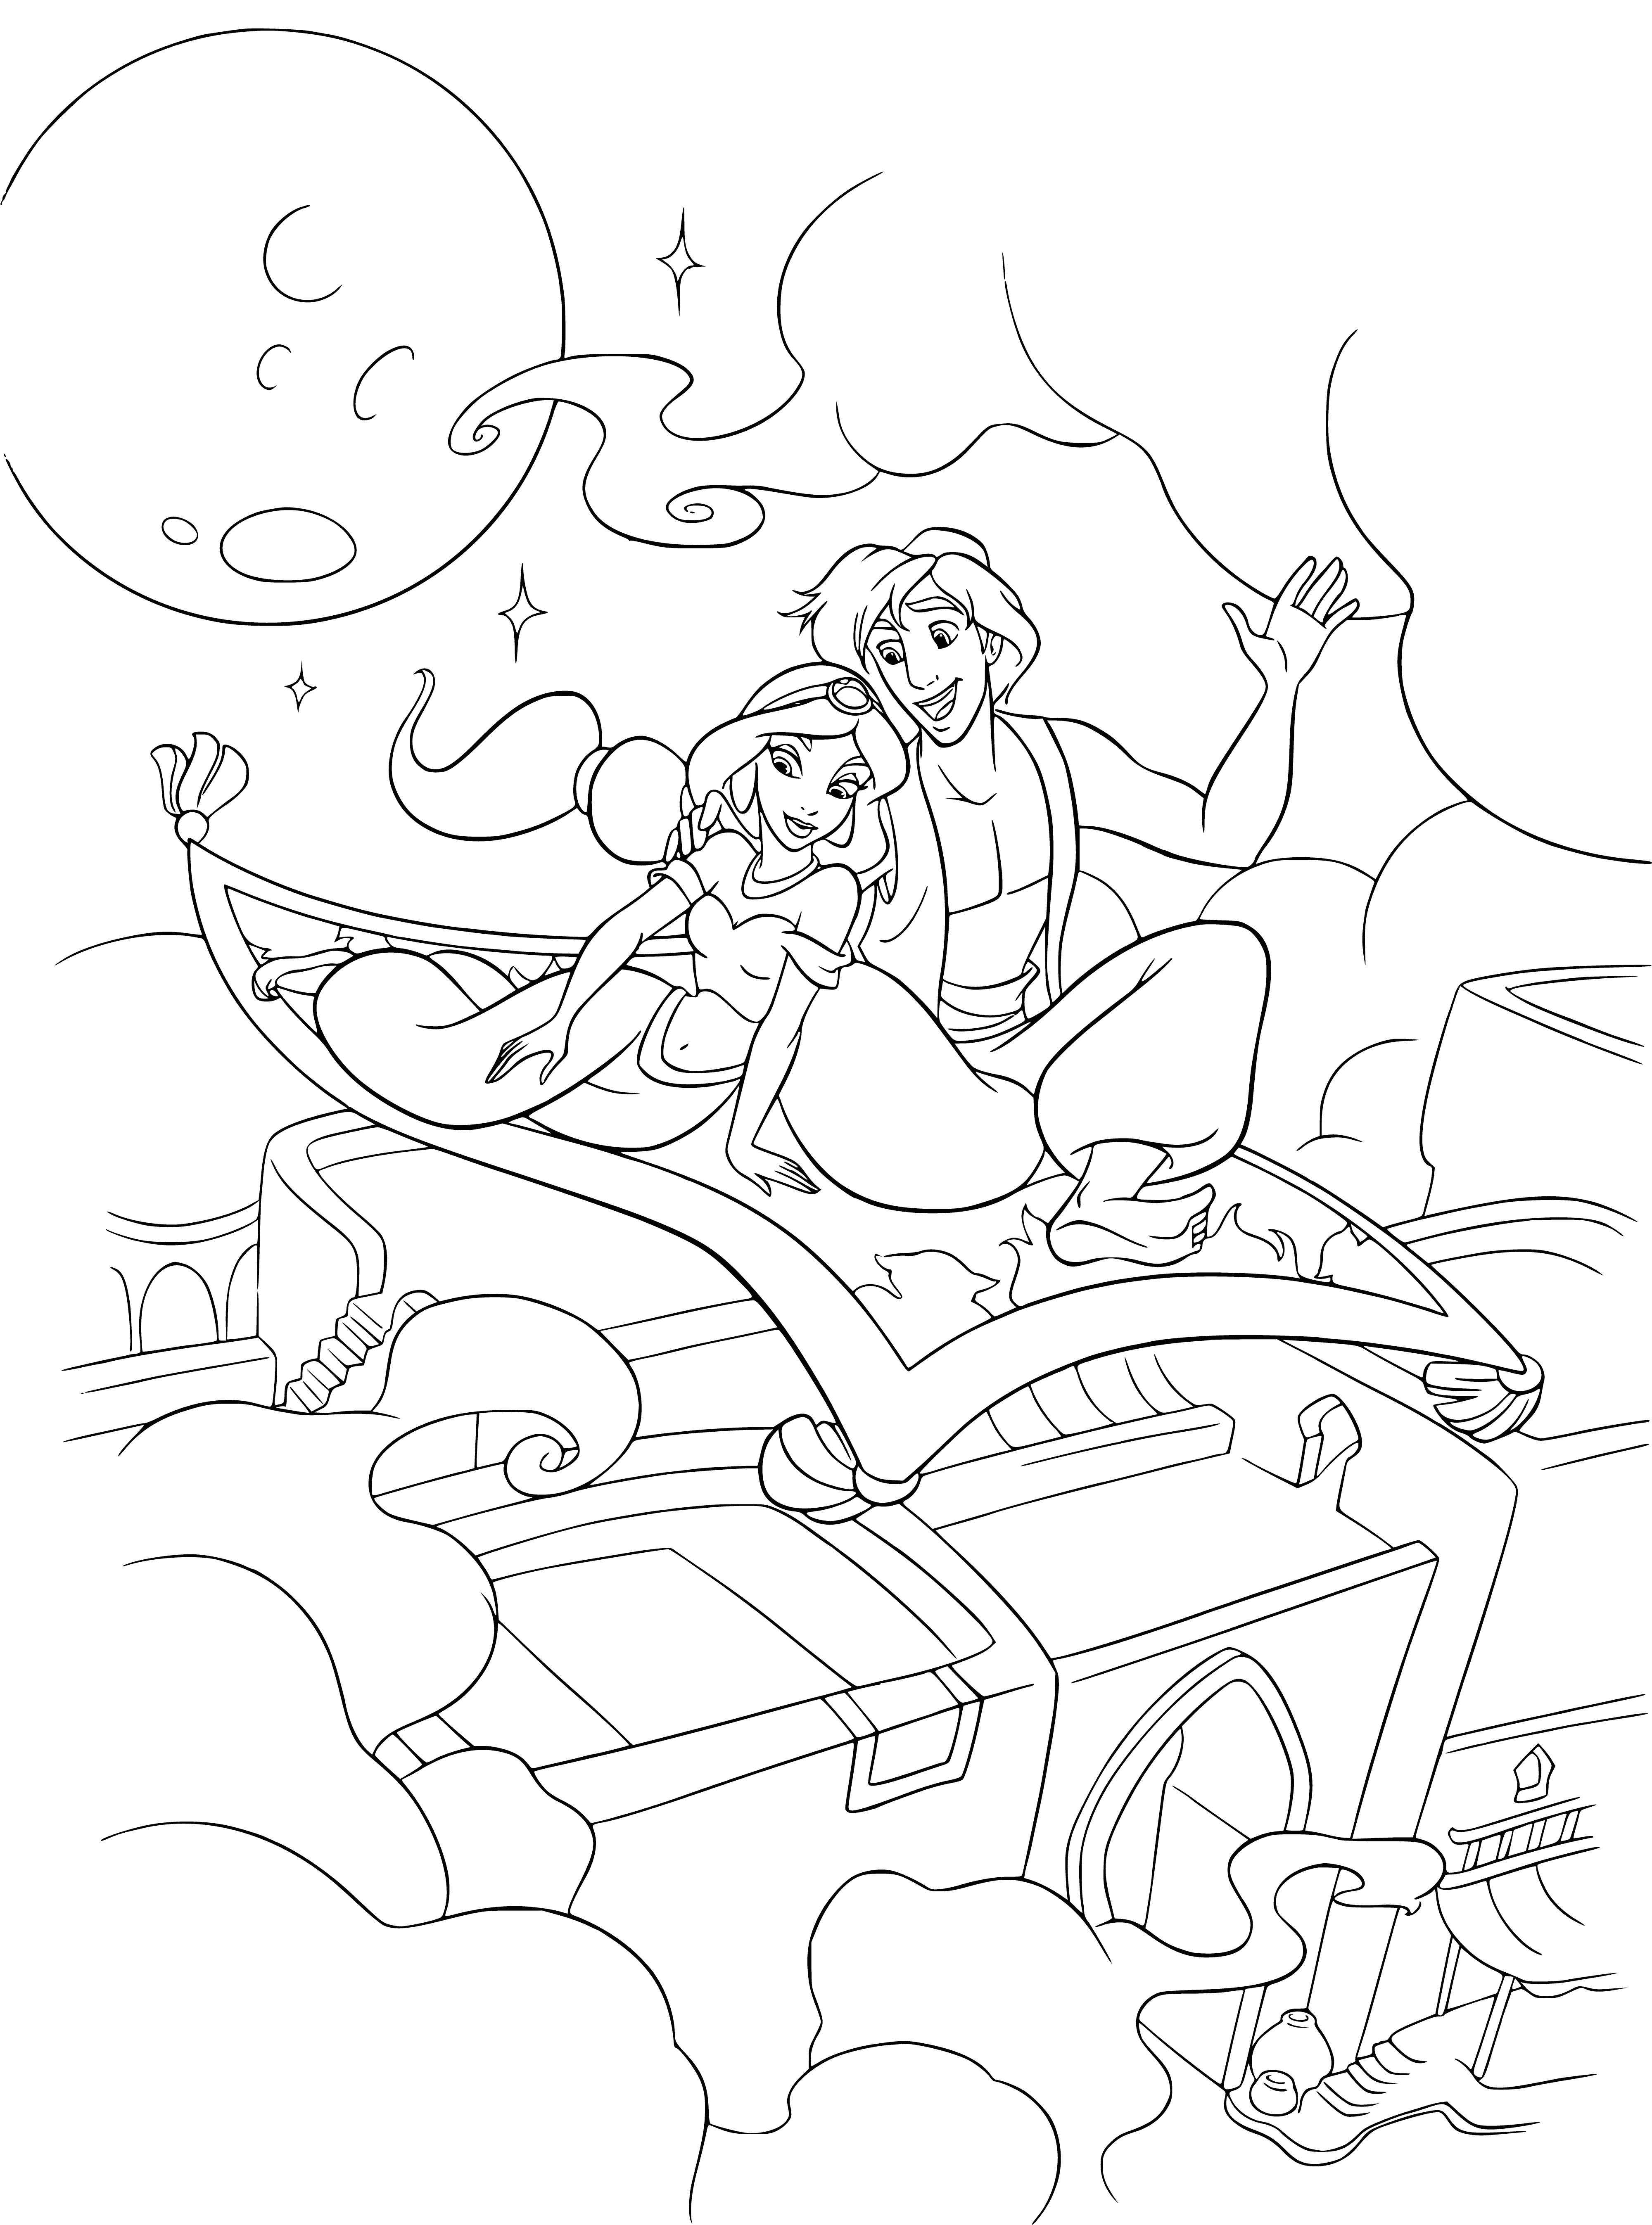 coloring page: Person riding a flying carpet over a bustling city with tall buildings and a river, holding a staff and wearing a turban and white robe. #magictravel